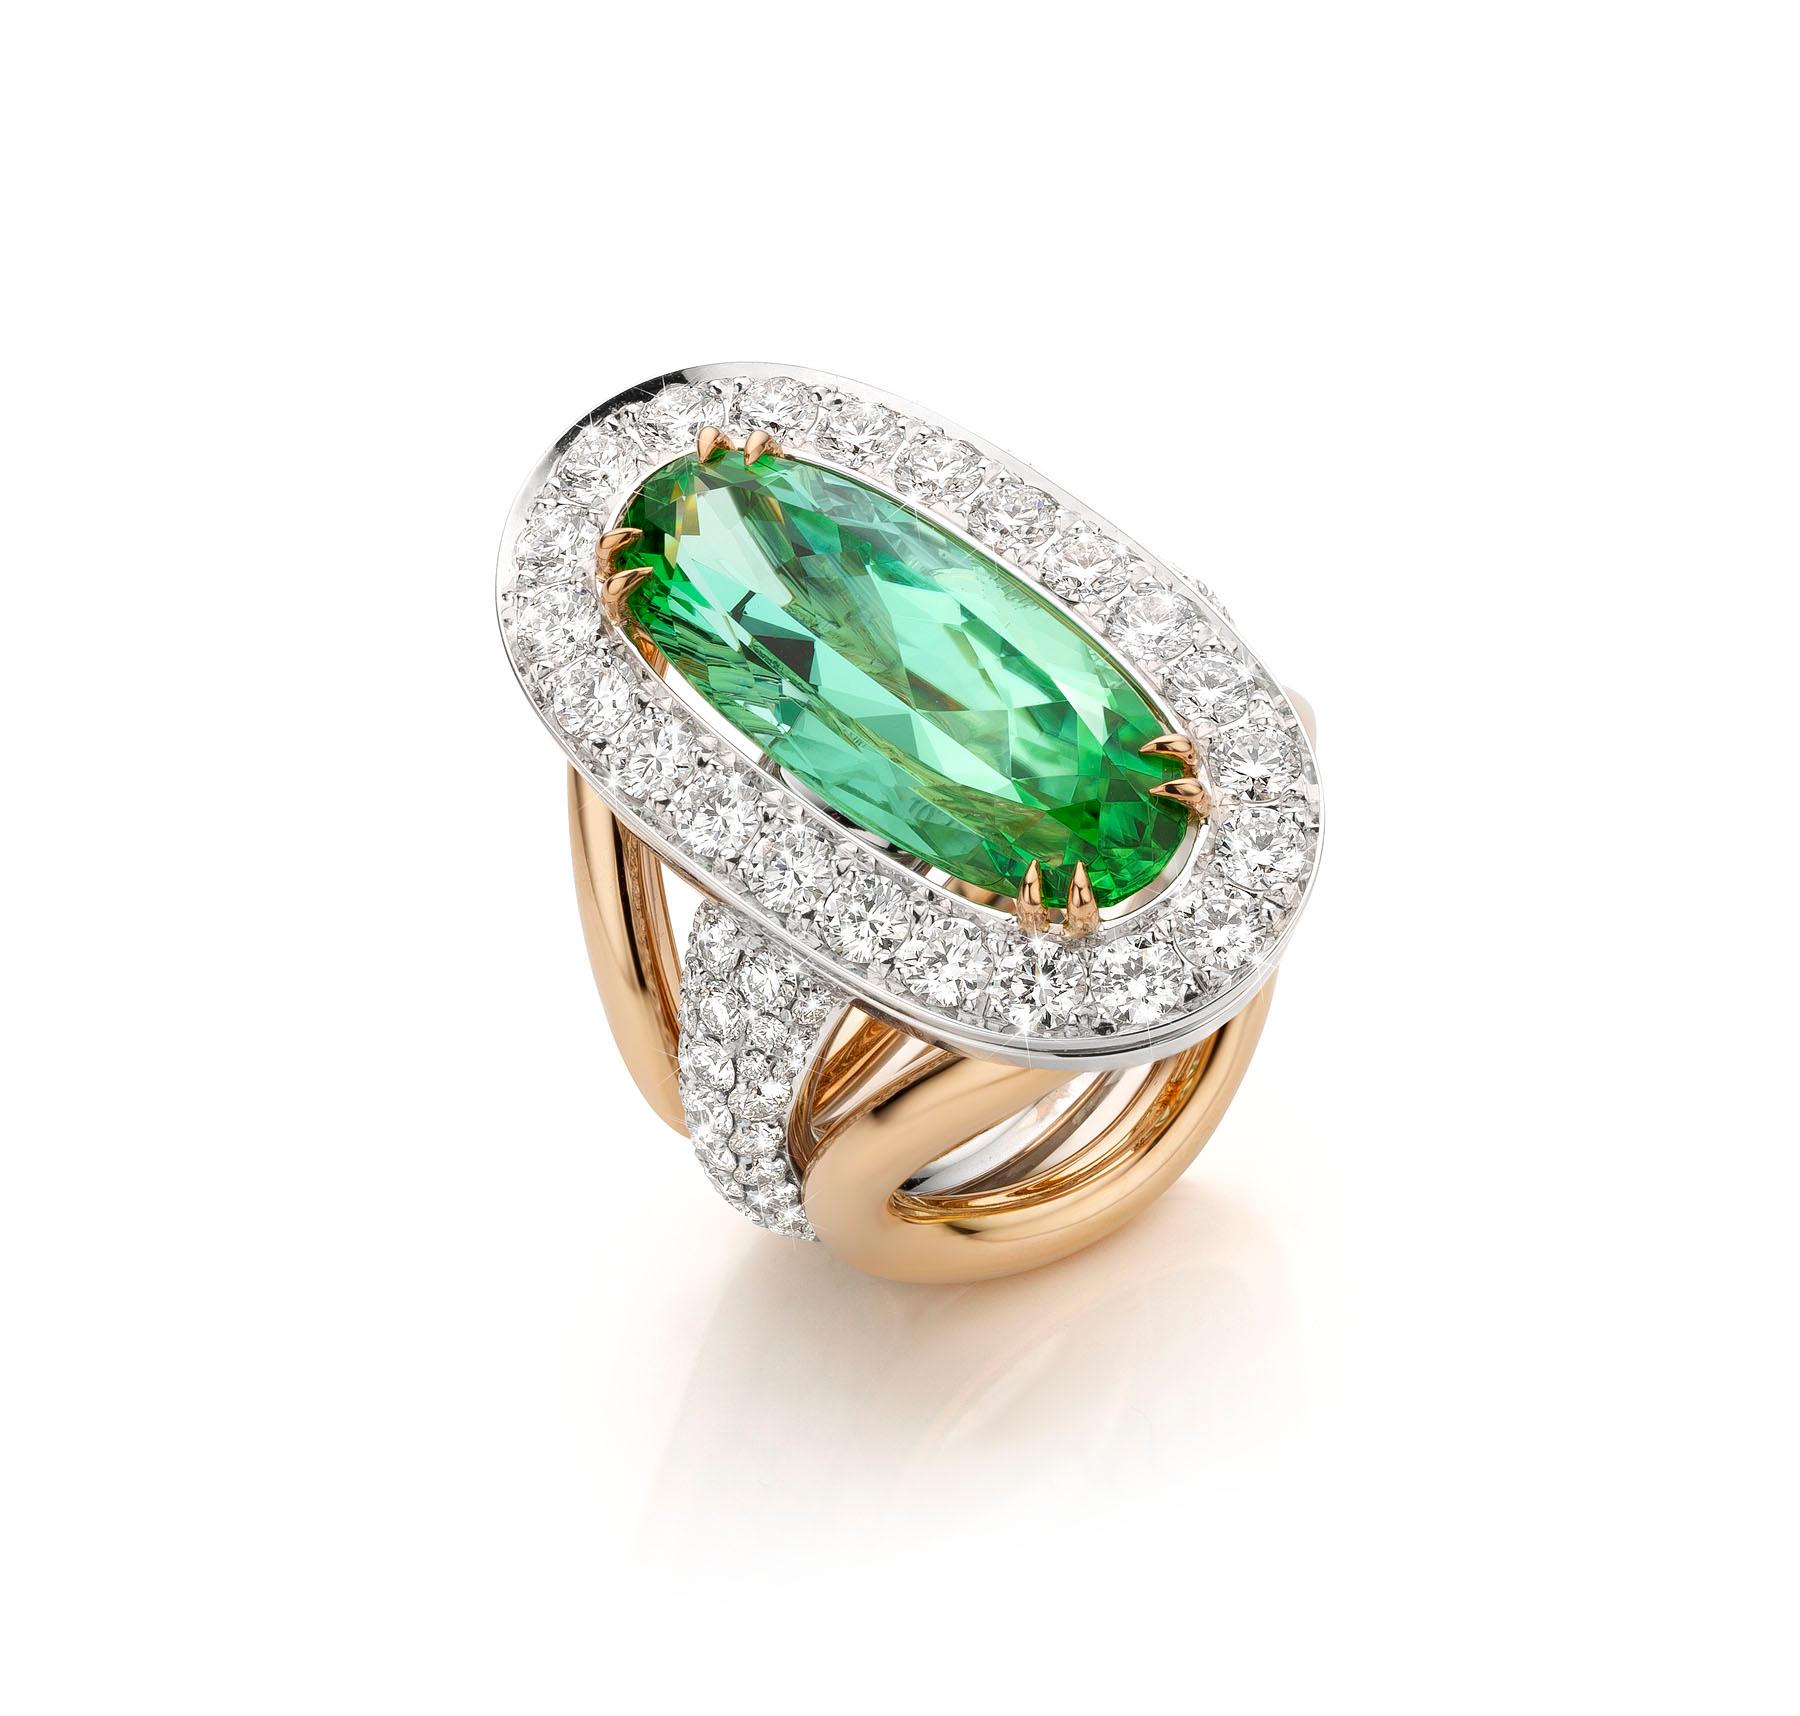 18 Karat White & Yellow Gold Cocktail Ring featuring a 10.37 carat Vivid Mint Green Tourmaline stone.

Oval cut measuring 22.7 x 9.8mm.
The Mint Tourmaline is embraced by D Flawless Collection Grade Diamonds weighing 14.57 carat.

This ring was